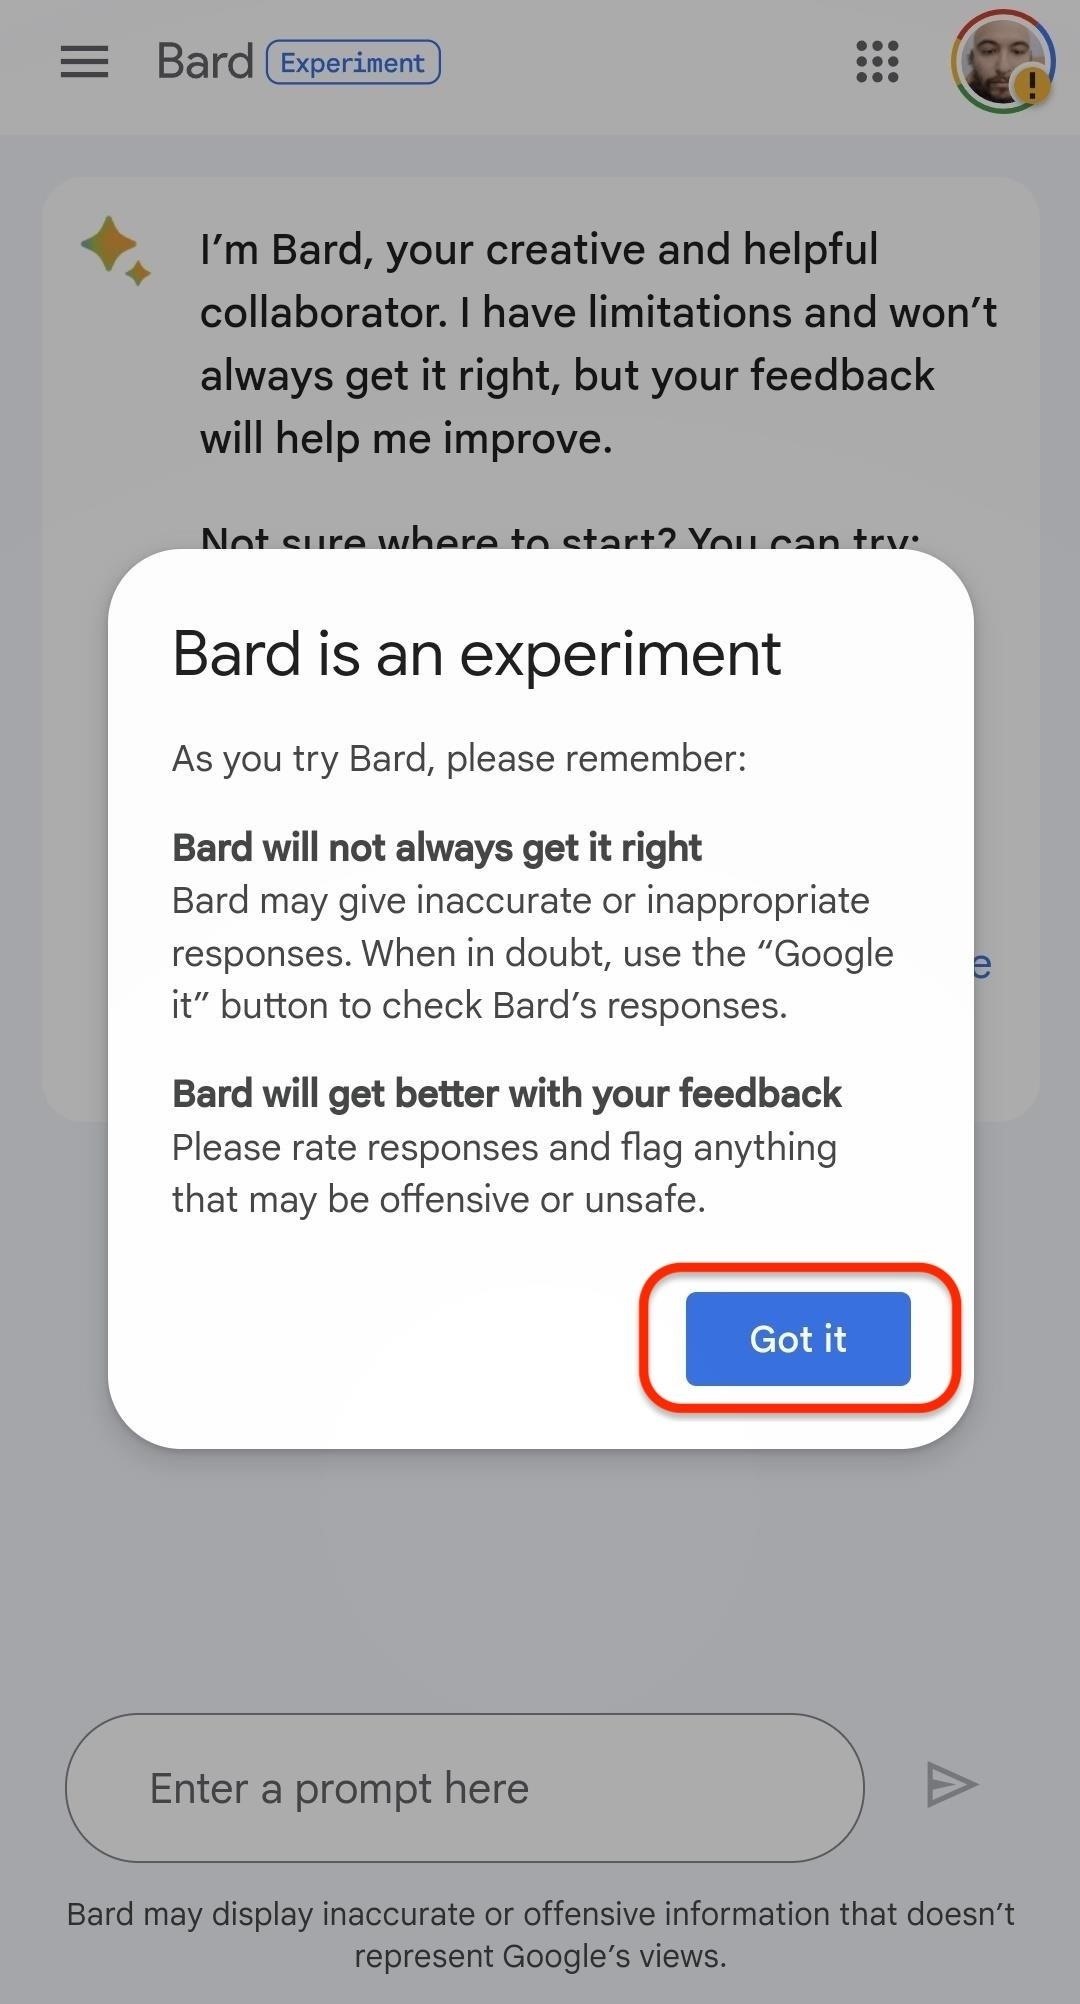 Use Google's New AI Chatbot Bard to Generate Text-Based Content on Anything